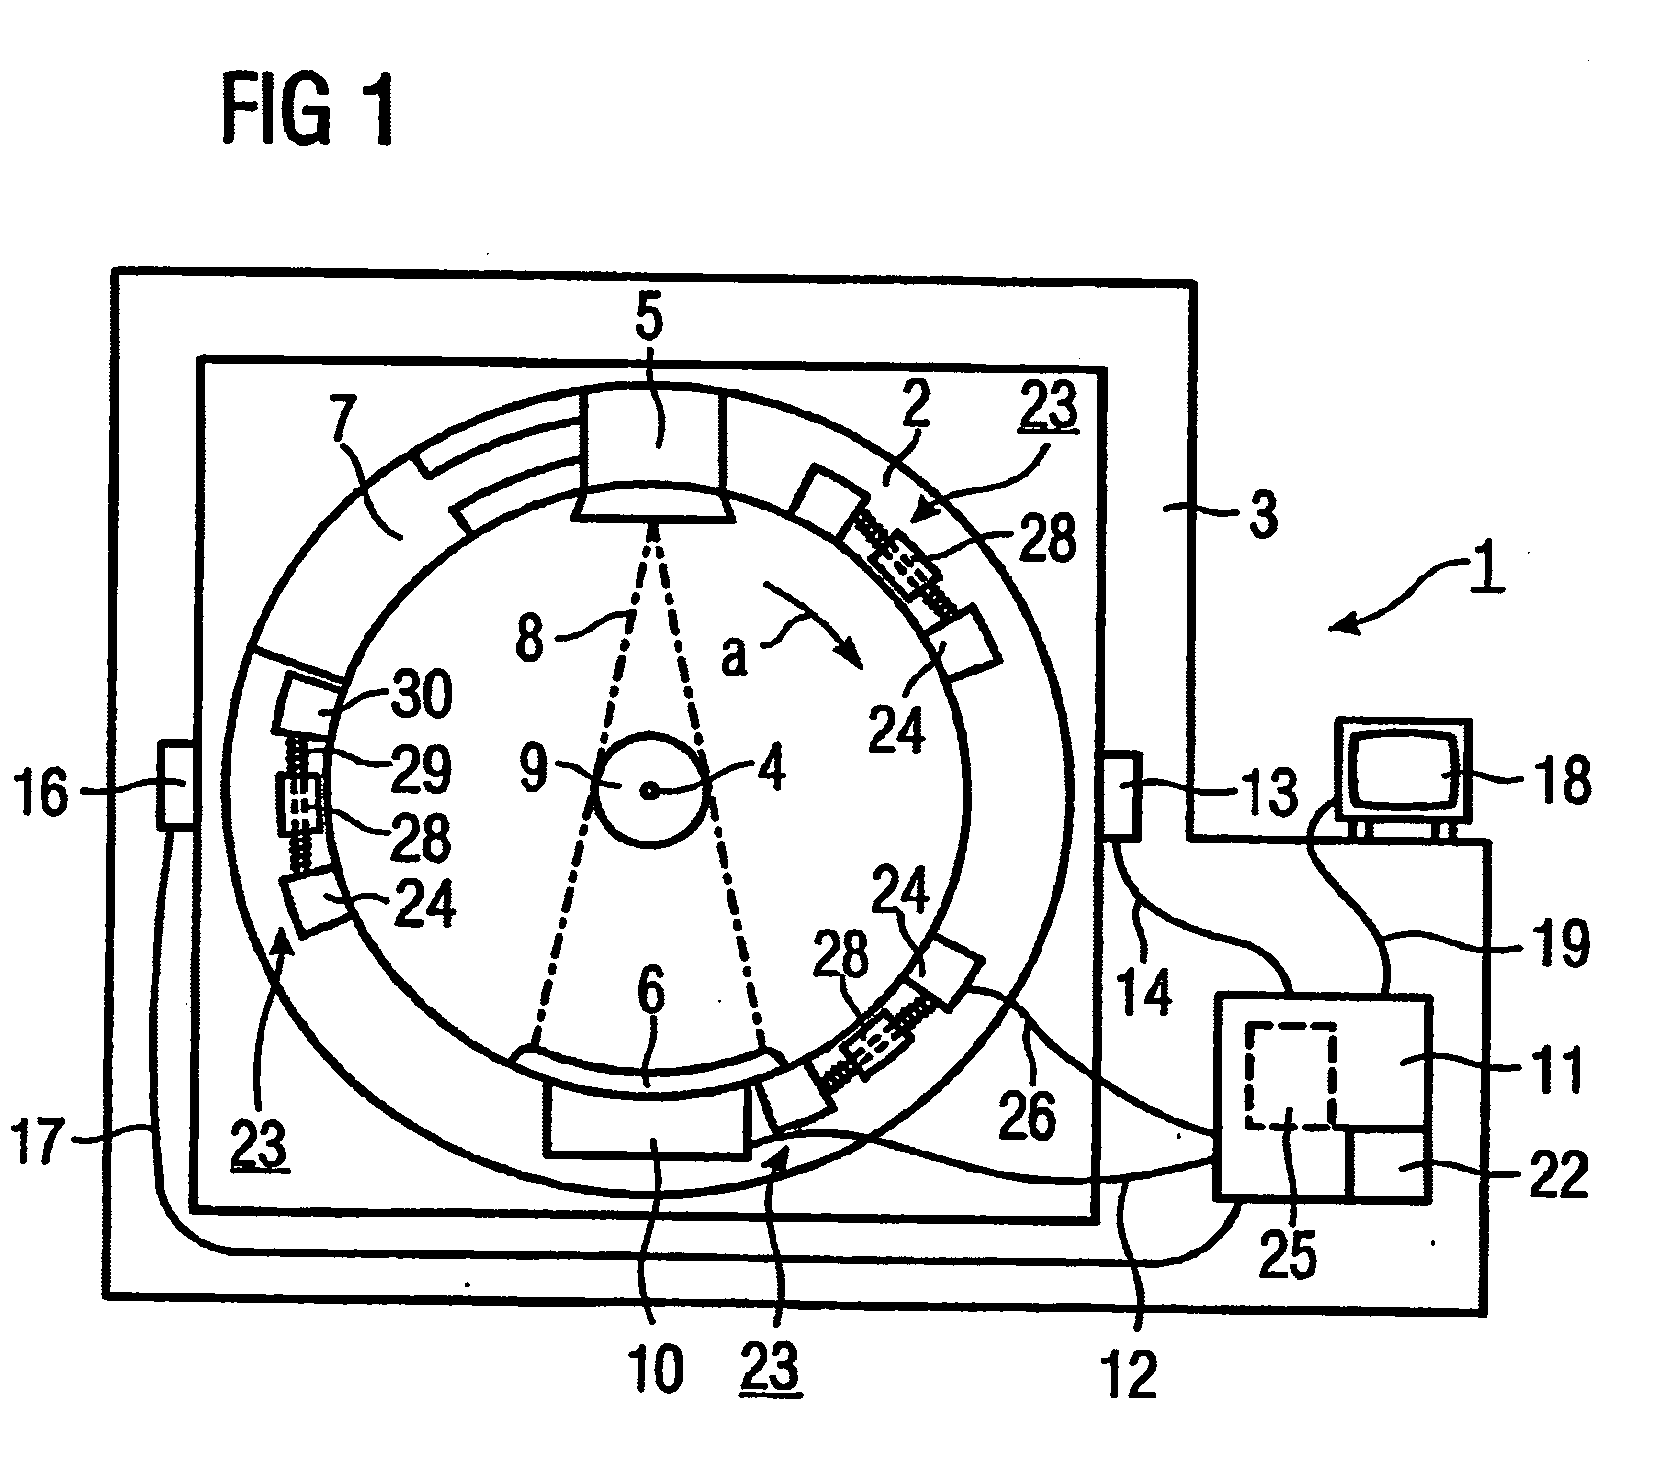 Automatic balancing system and method for a tomography device